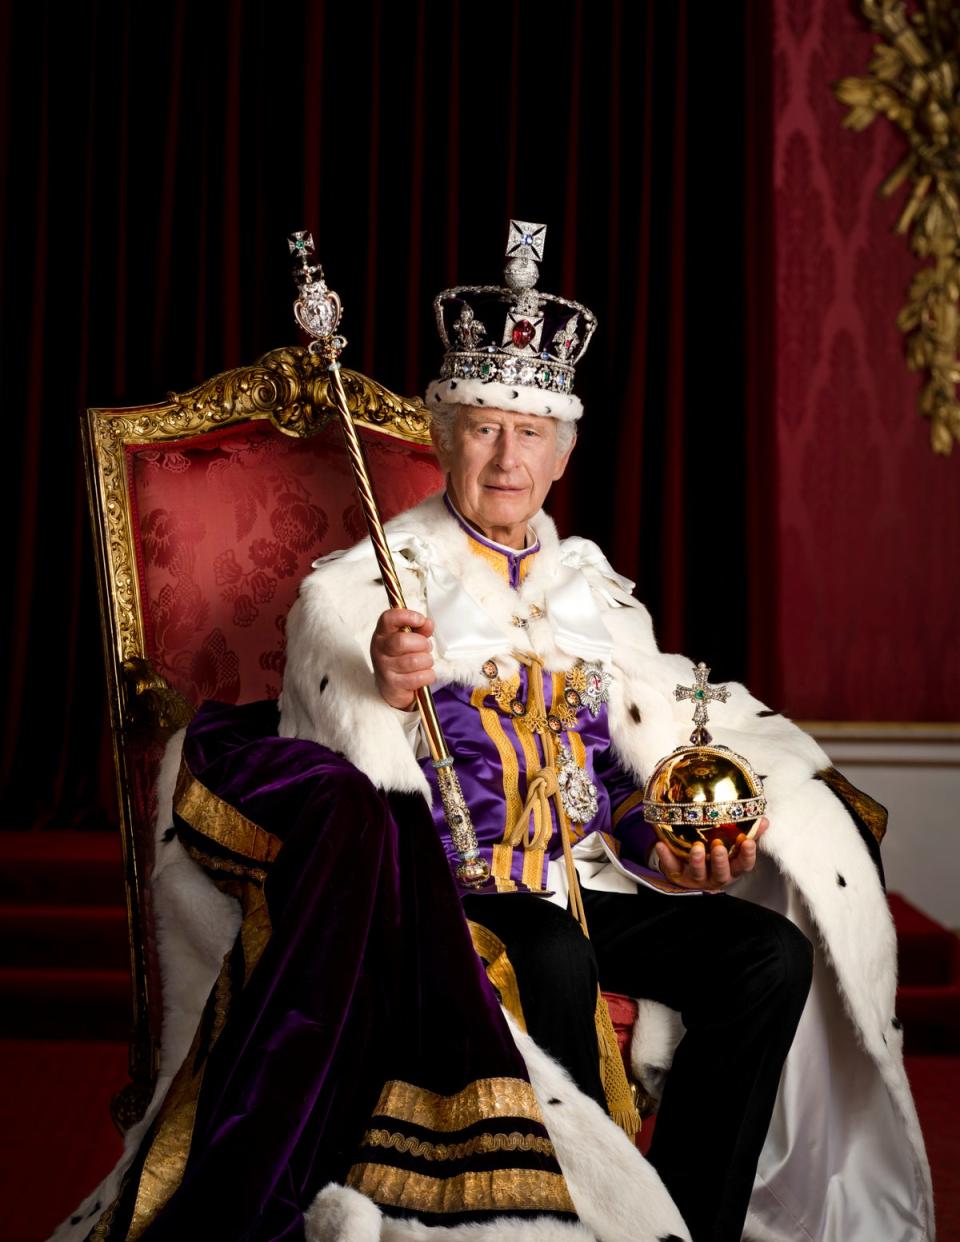 King Charles III is pictured in full regalia in the Throne Room at Buckingham Palace, London (PA)